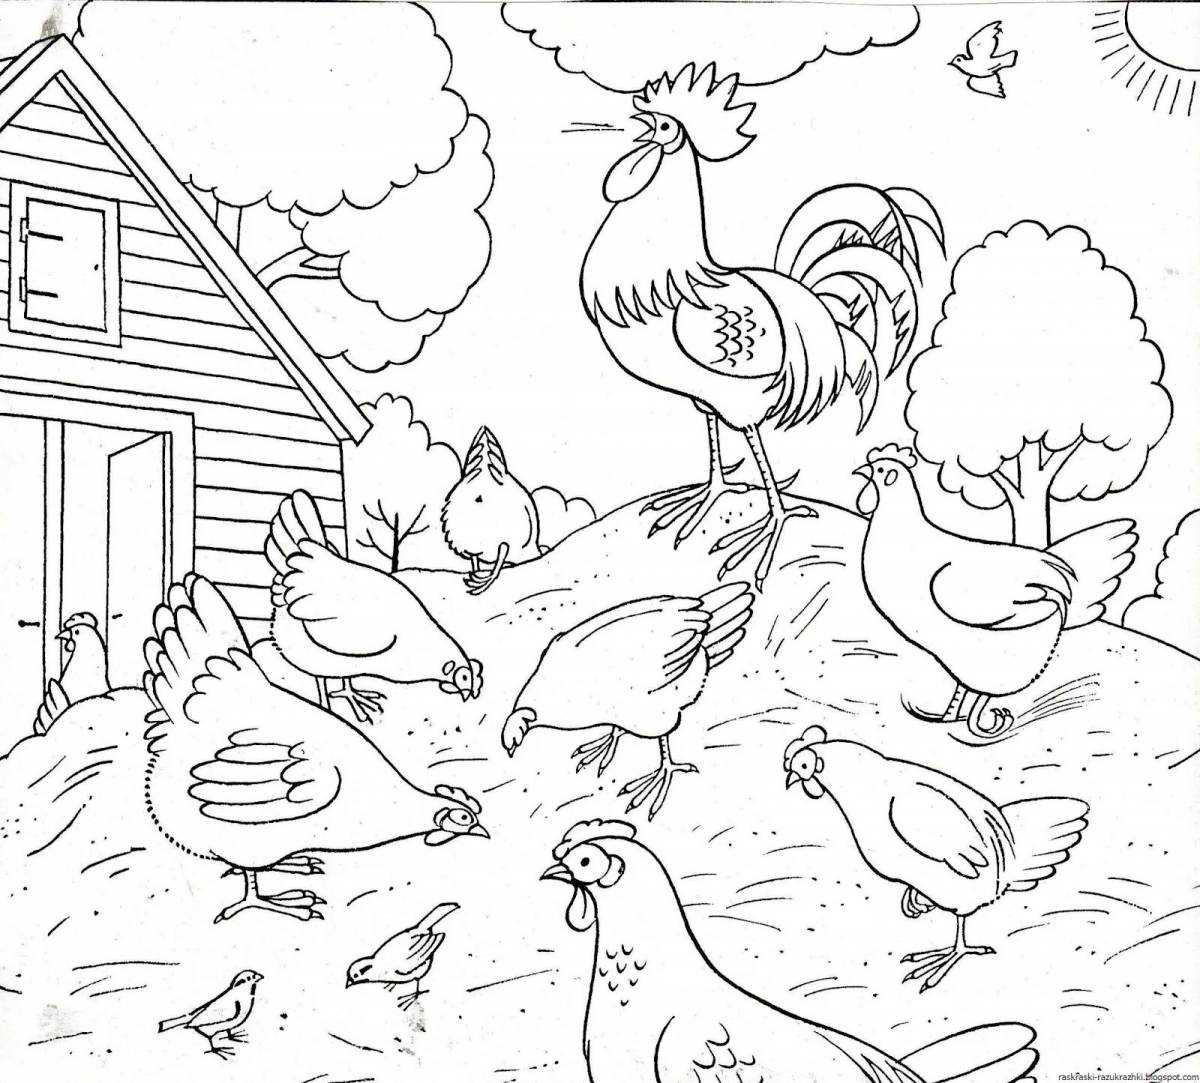 Colorful and charming yard coloring book for kids